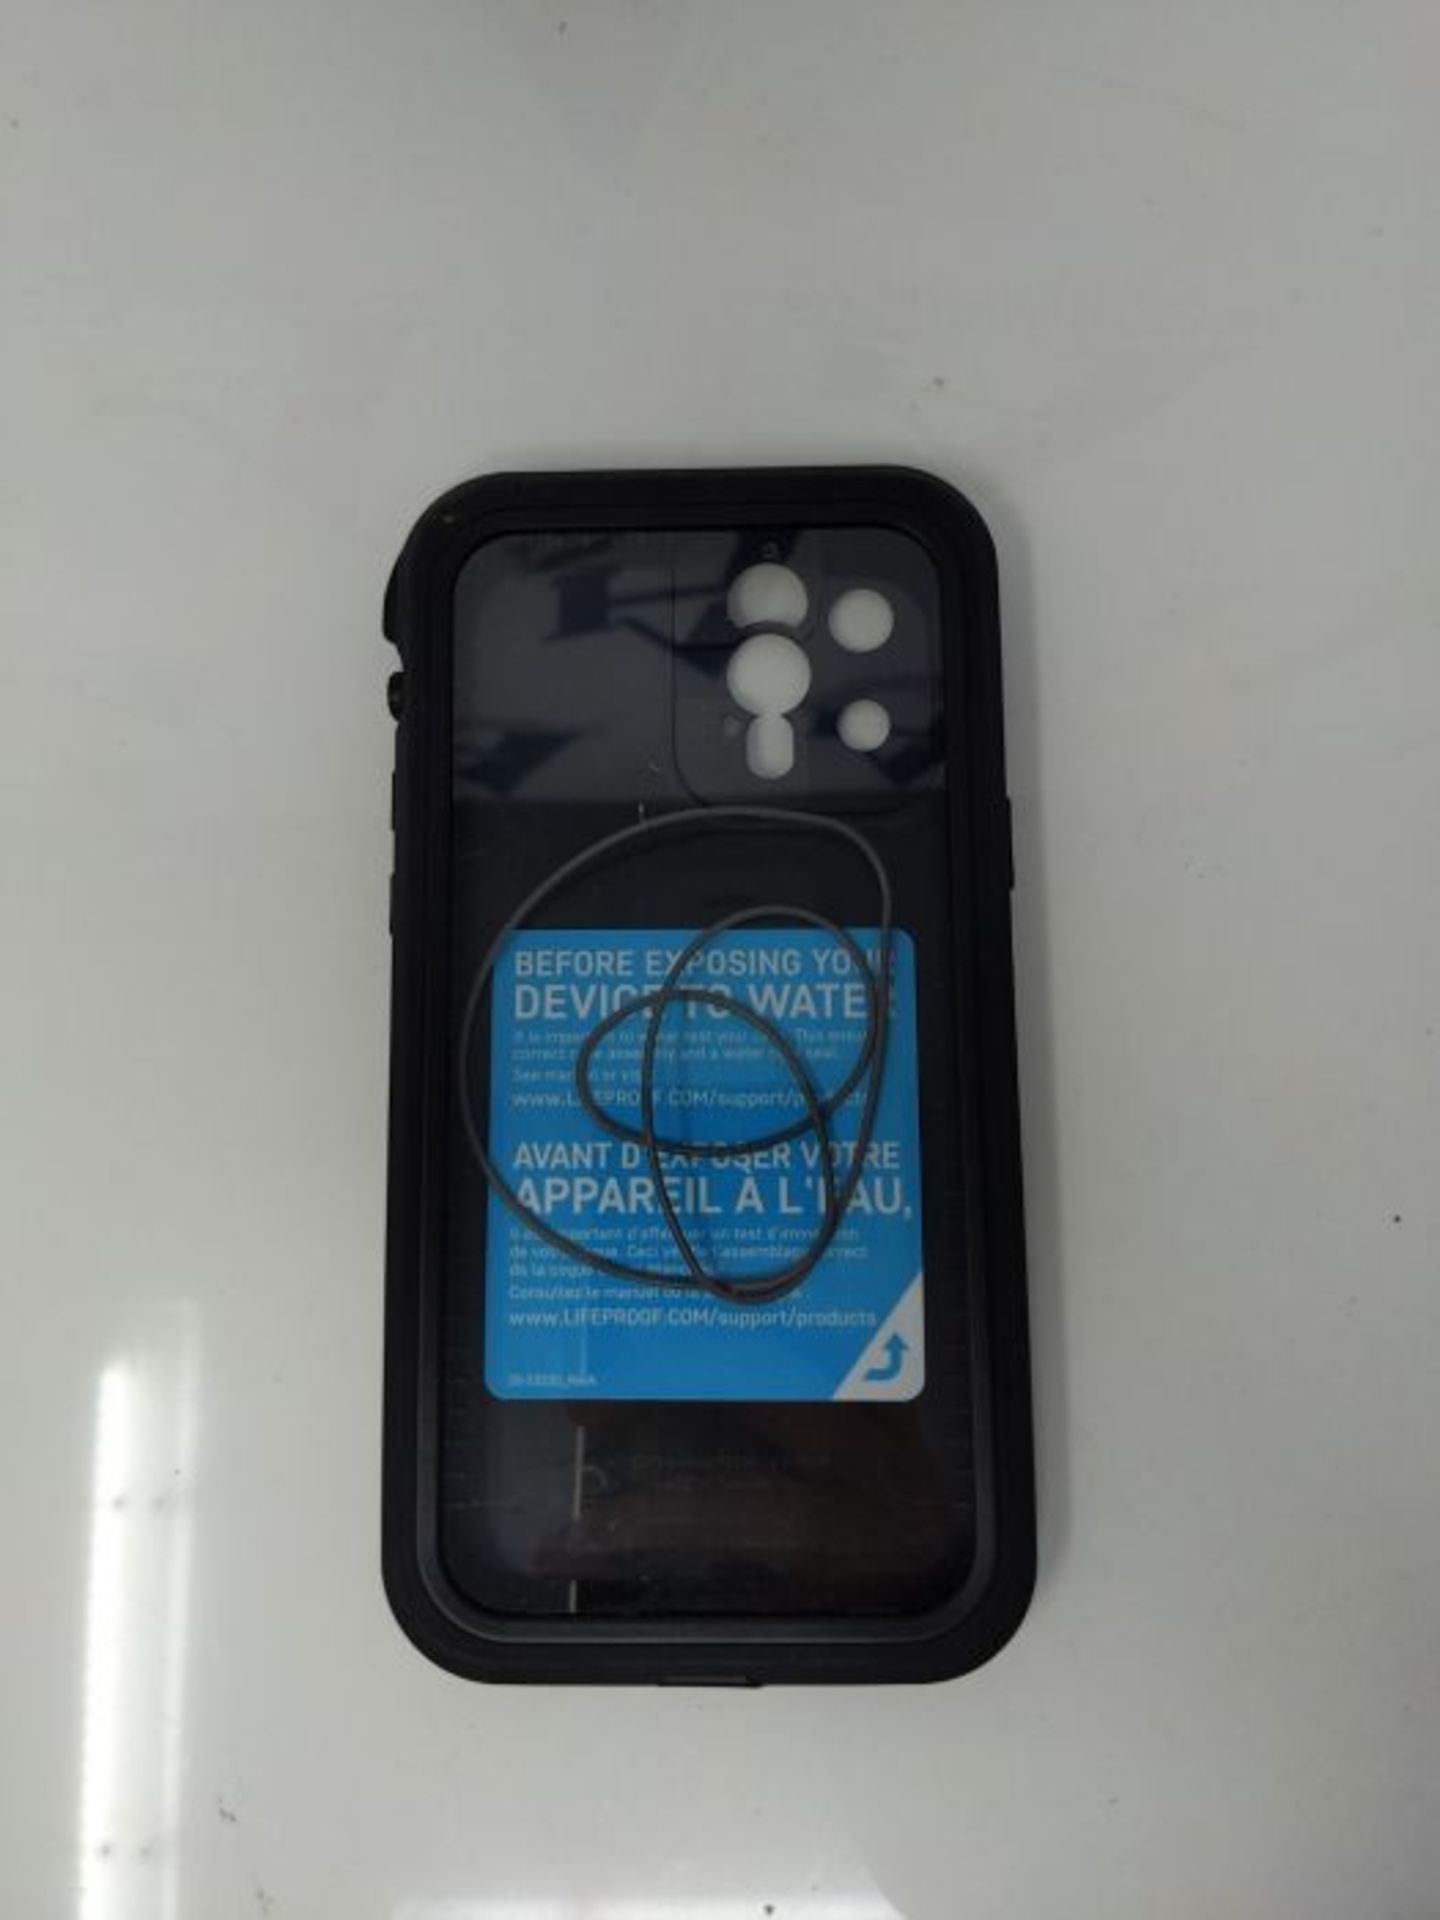 LifeProof for iPhone 12 Pro, Waterproof Drop Protective Case, Fre Series, Black - Image 6 of 6